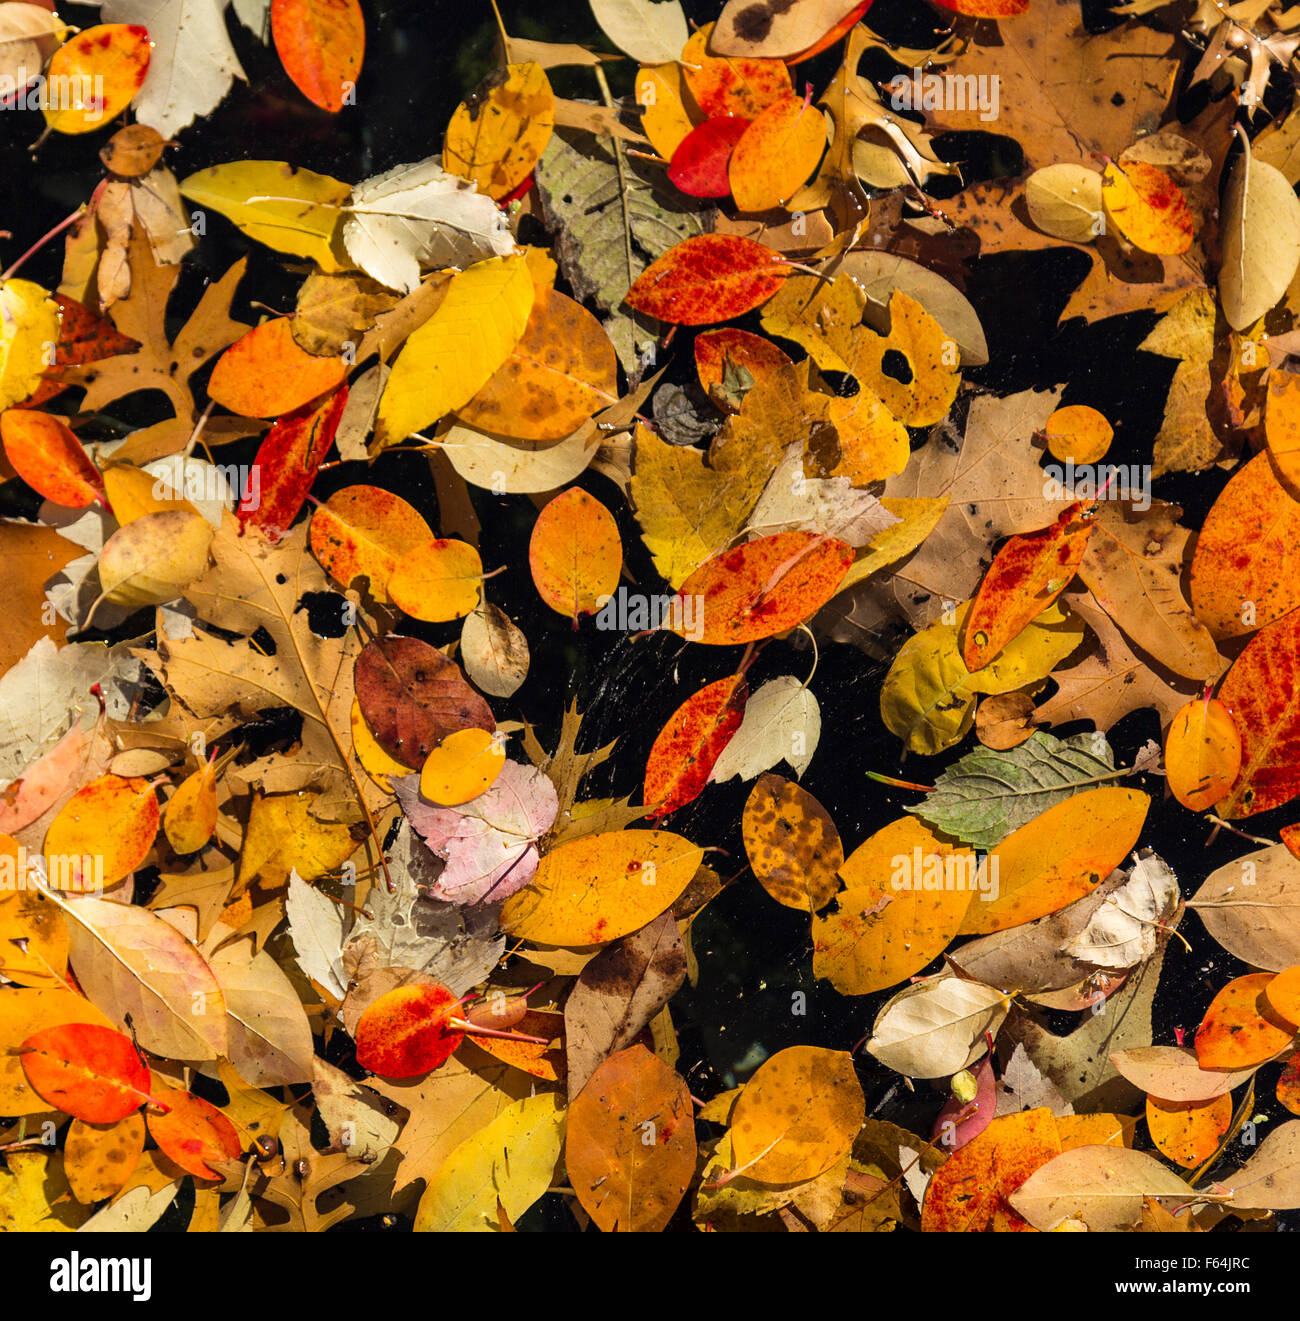 Random pattern of colorful autumn leaves floating in a pool of water. Black background Stock Photo